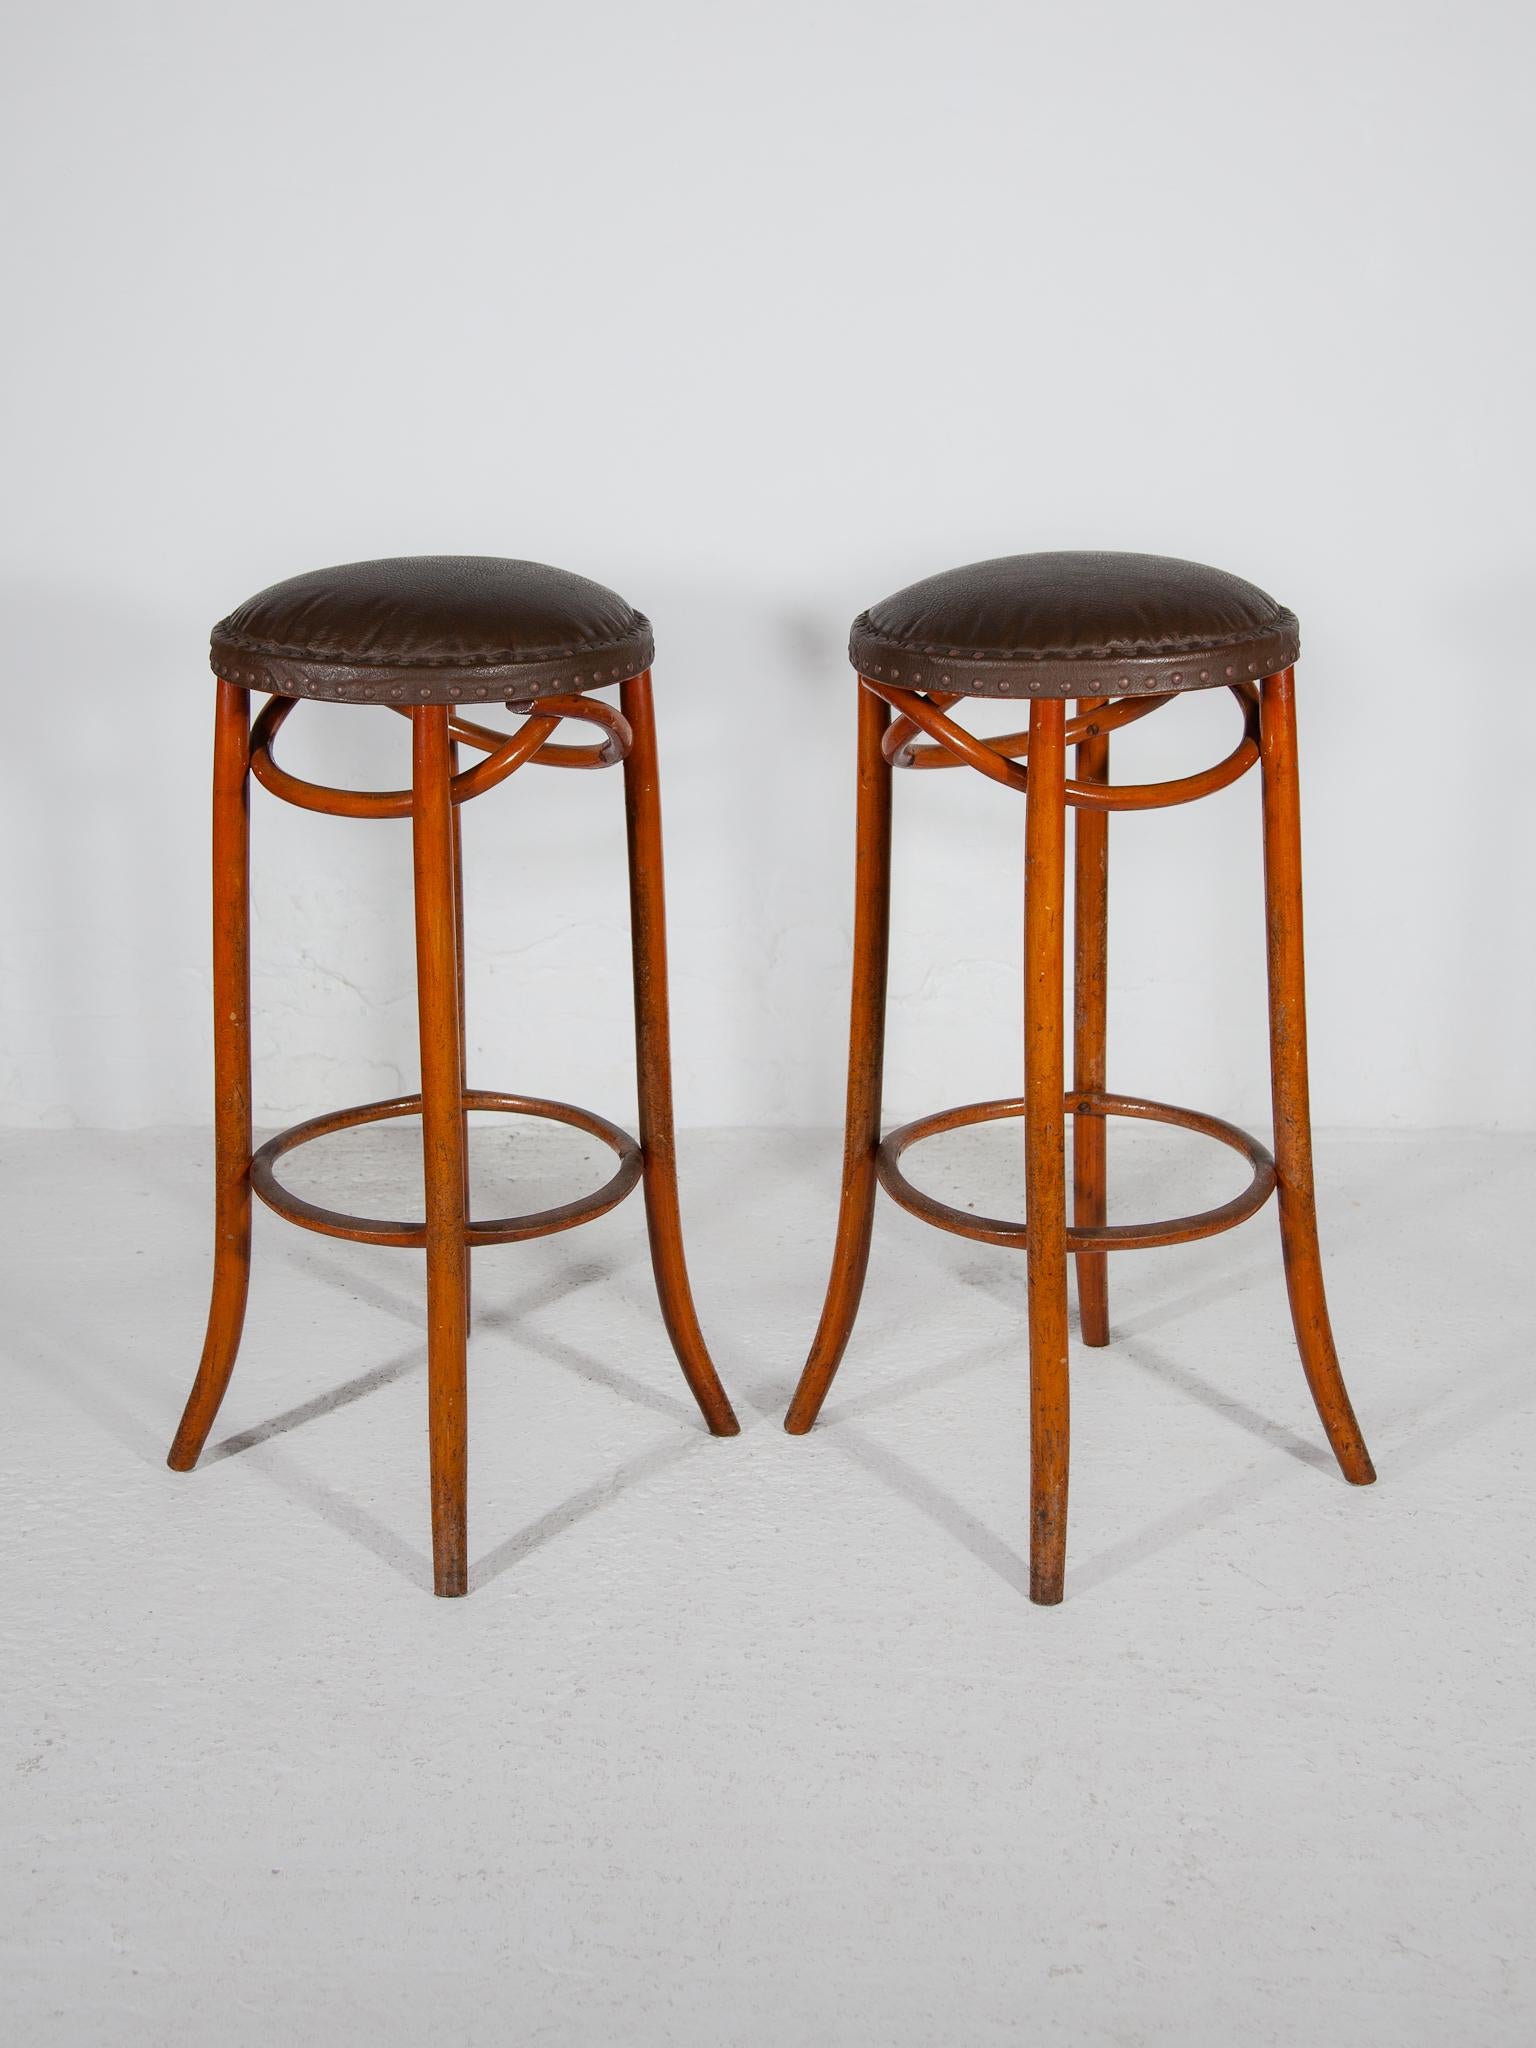 The Original no.18 bentwood barstool in solid beech wood that features reinforced joints and overall cutting edge construction and with a padded seat. This is a durable stool yet adds ample ambiance to café’s, restaurants, hotels and bars. 